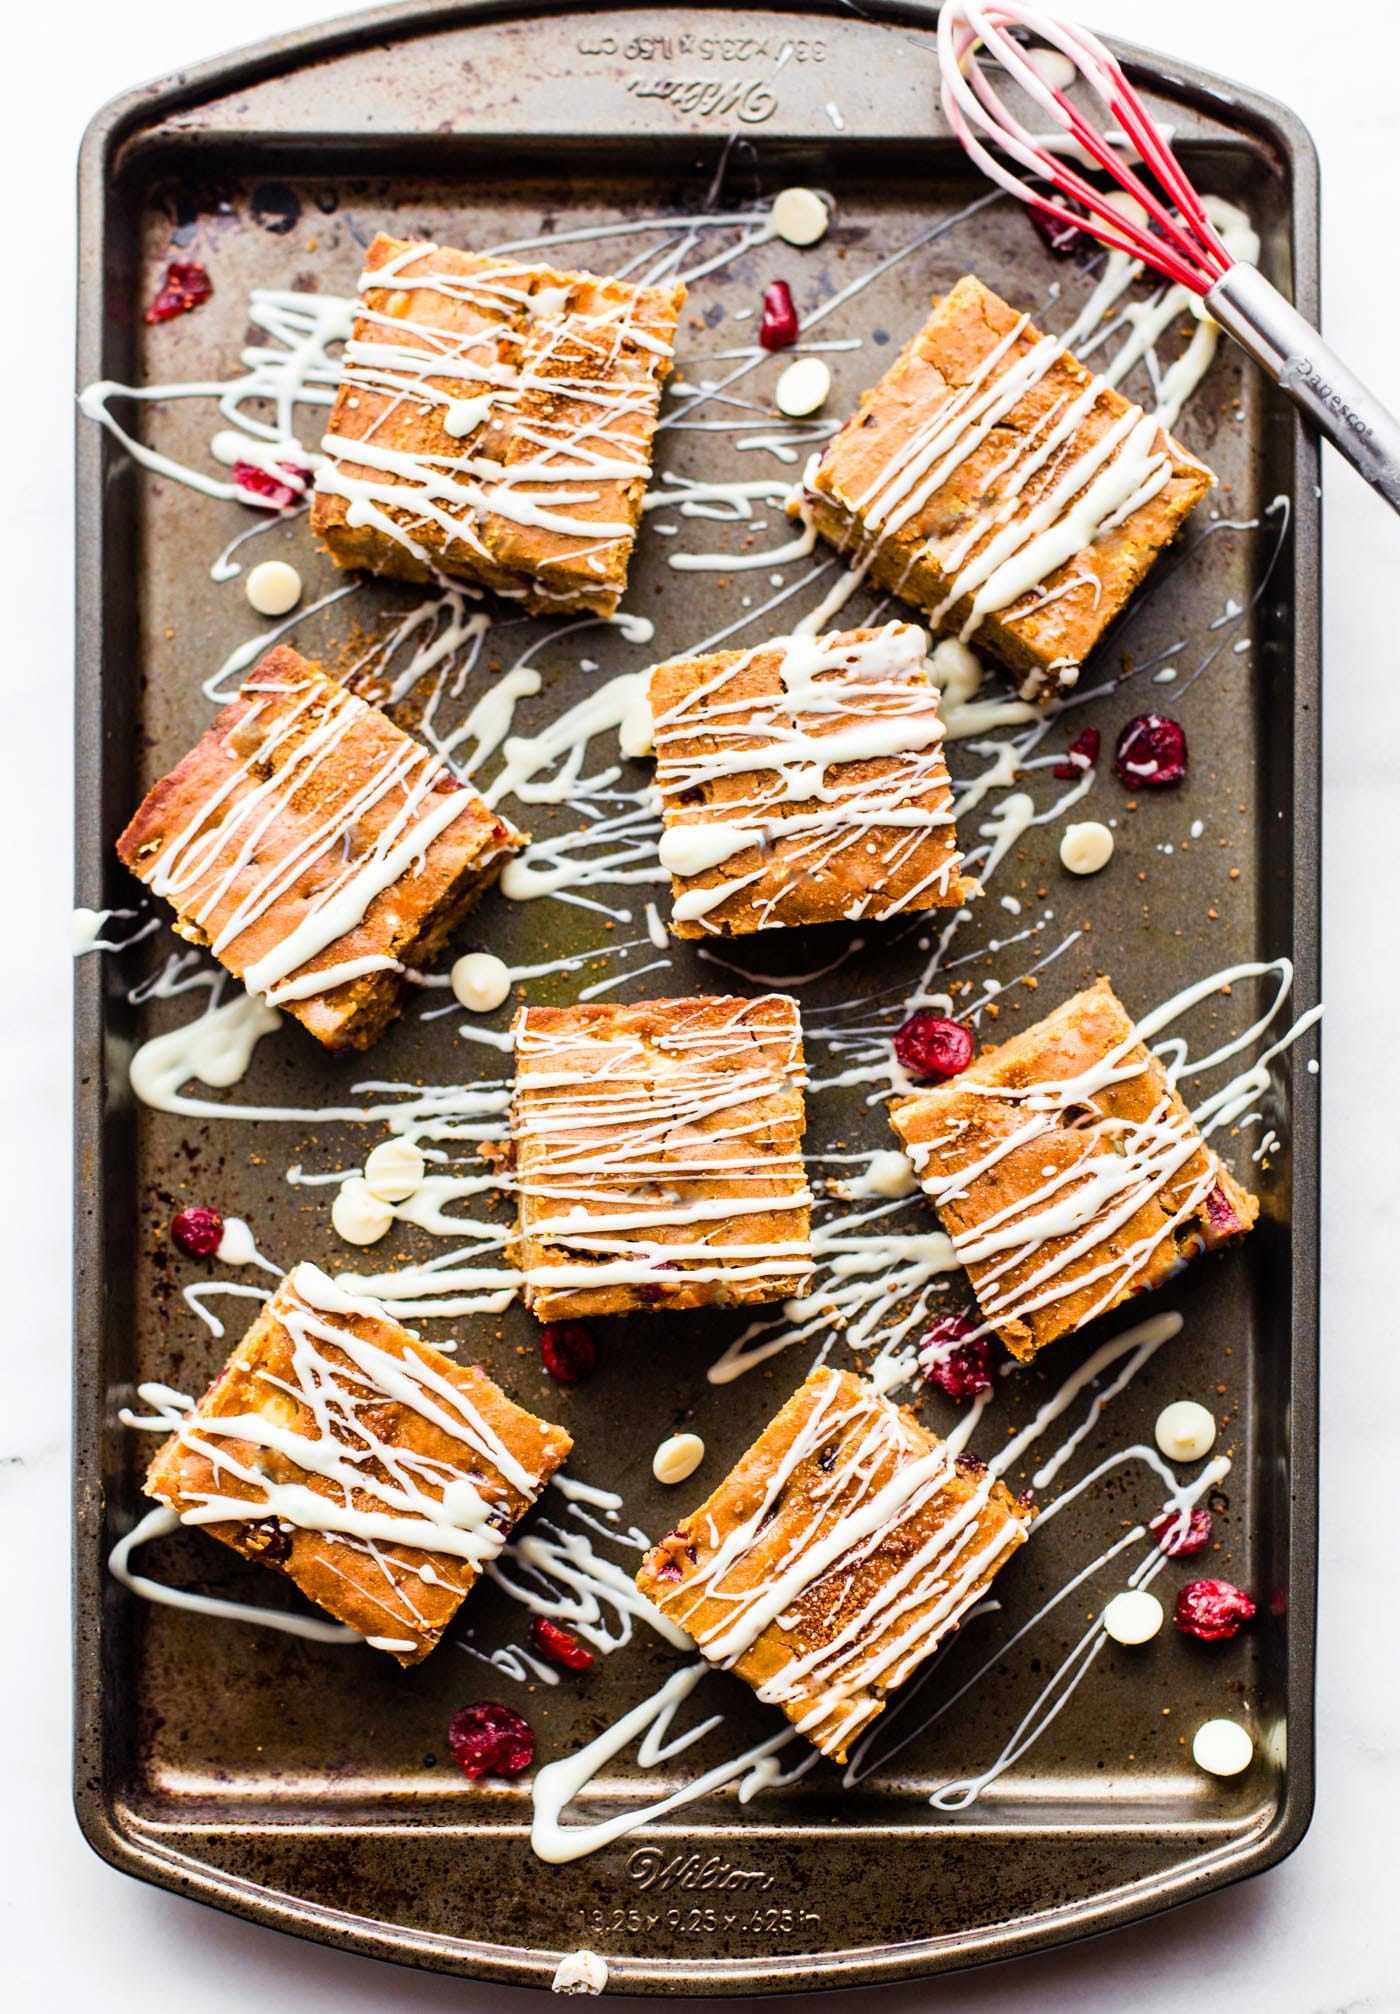 Vegan cranberry white chocolate pumpkin bars on a baking sheet, drizzled with white chocolate